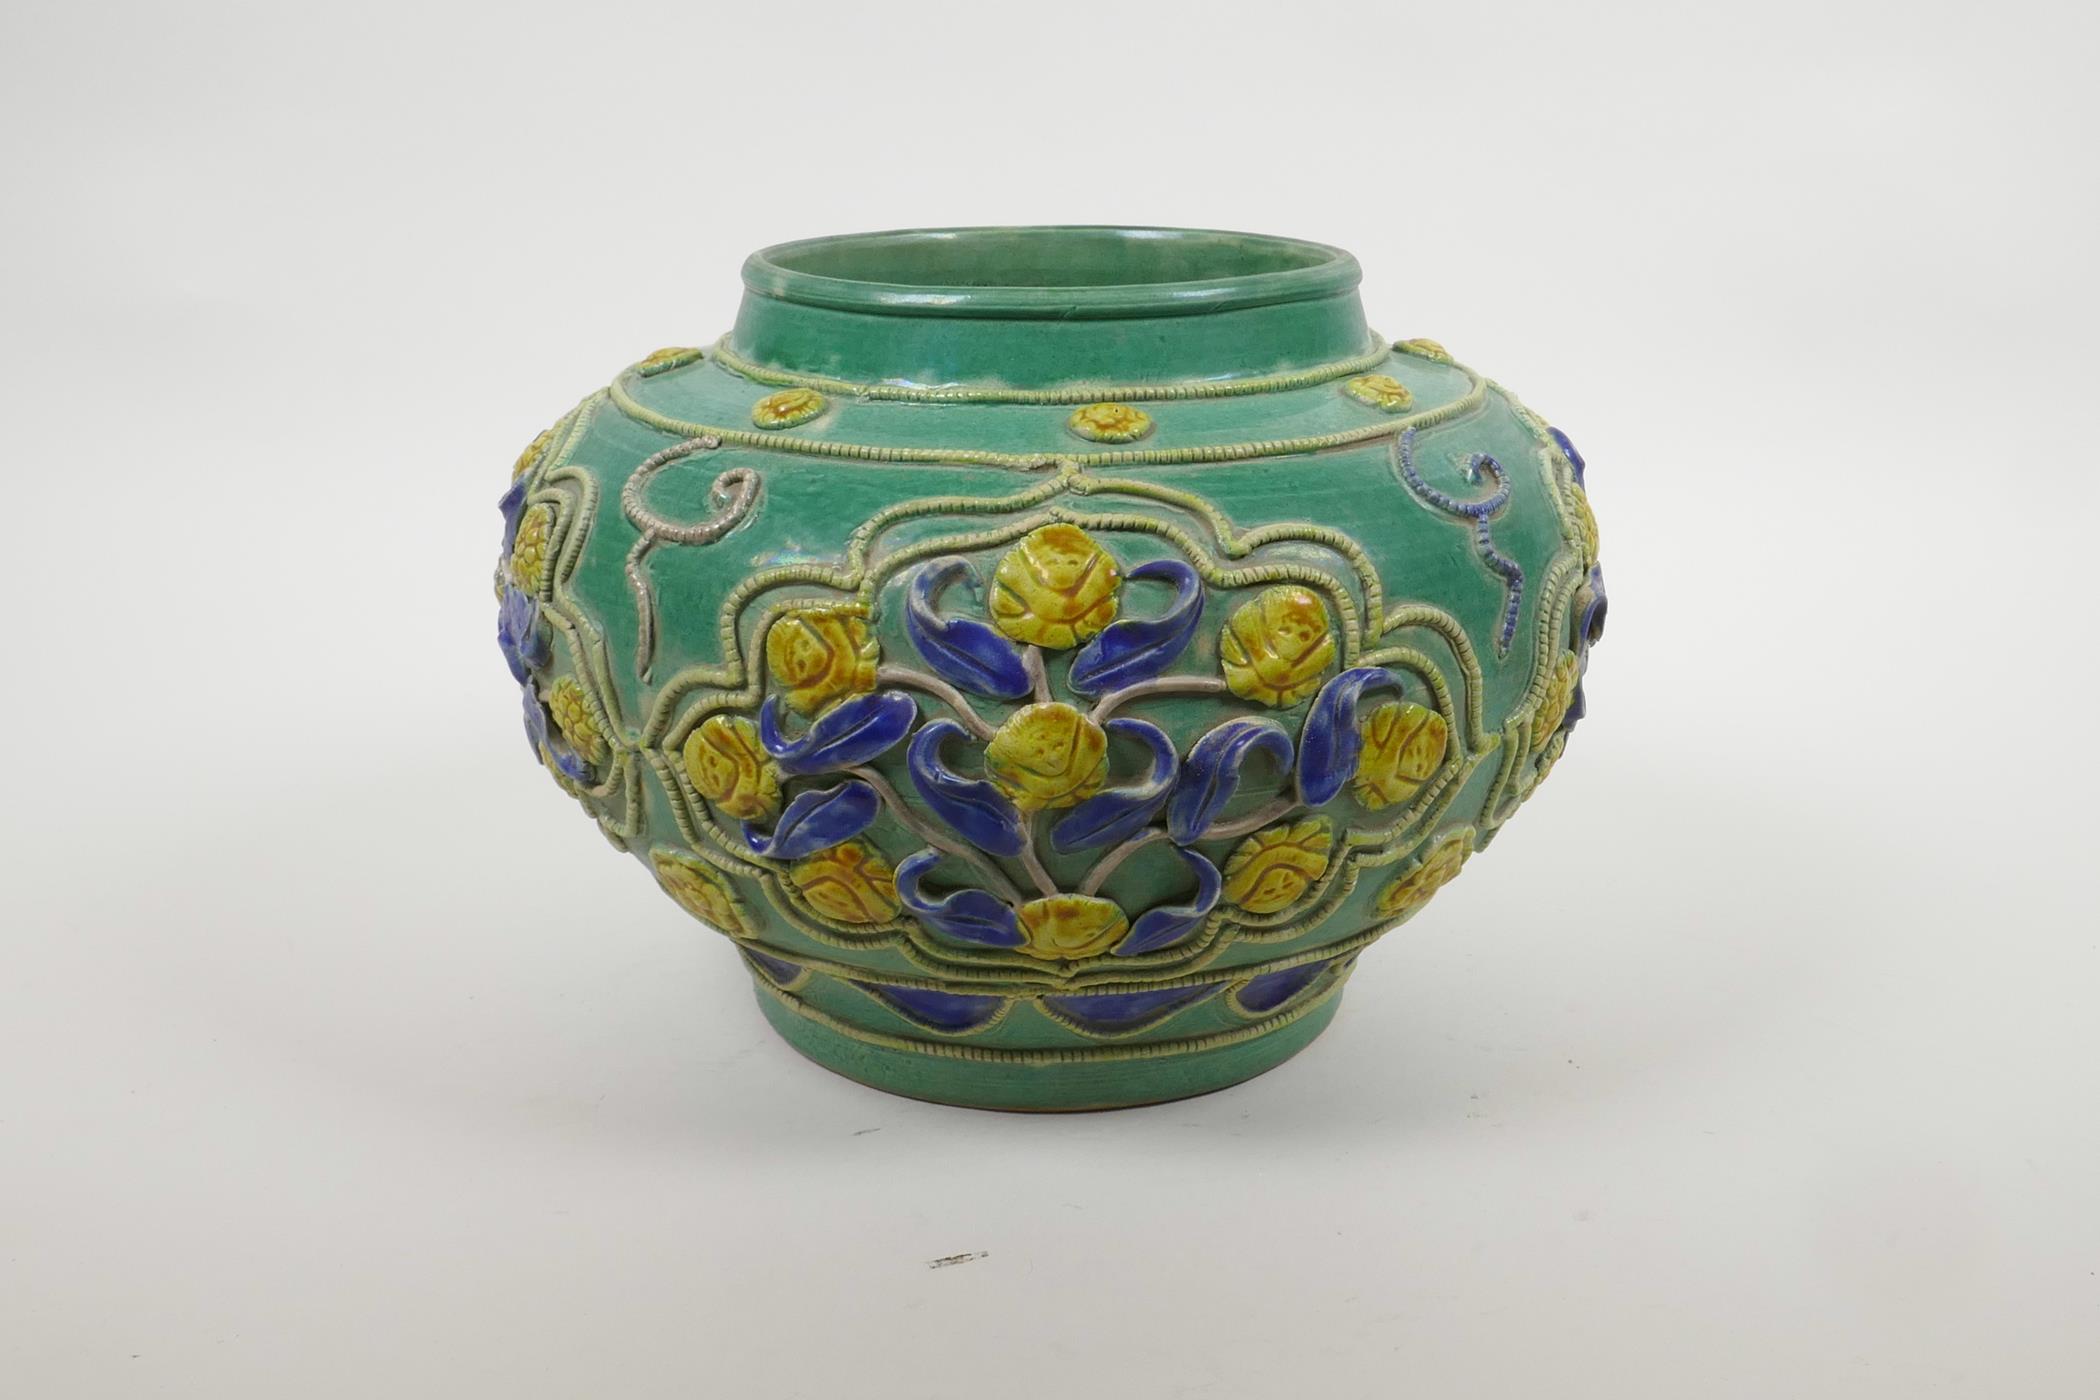 A Chinese green ground pottery vase with raised yellow and blue floral decoration, 9" diameter - Image 2 of 5